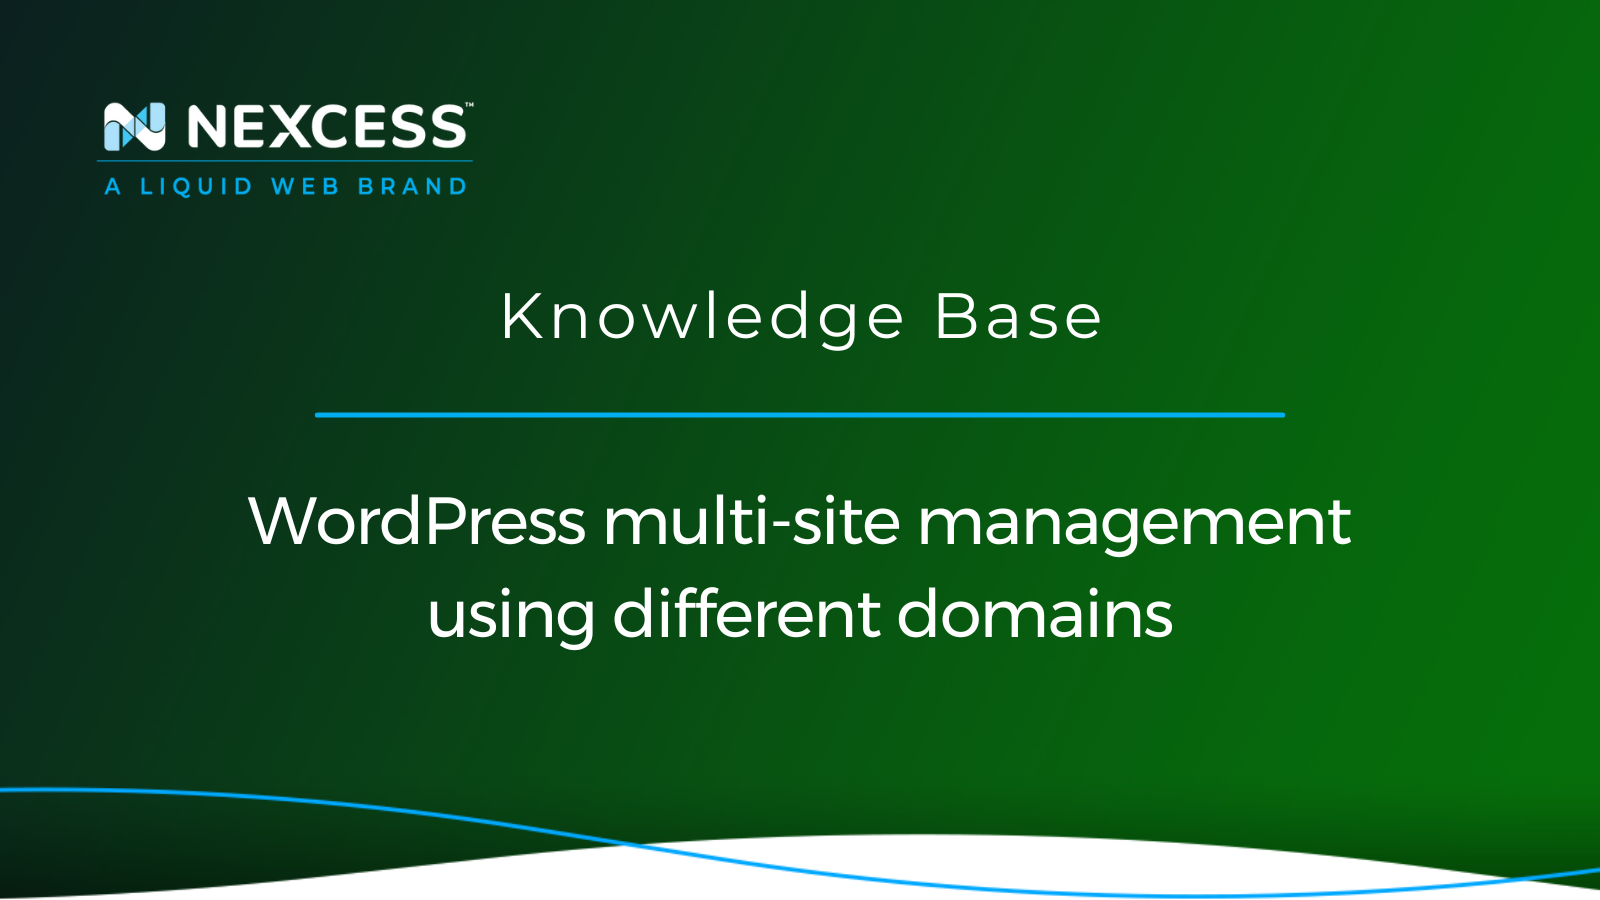 WordPress multi-site management using different domains